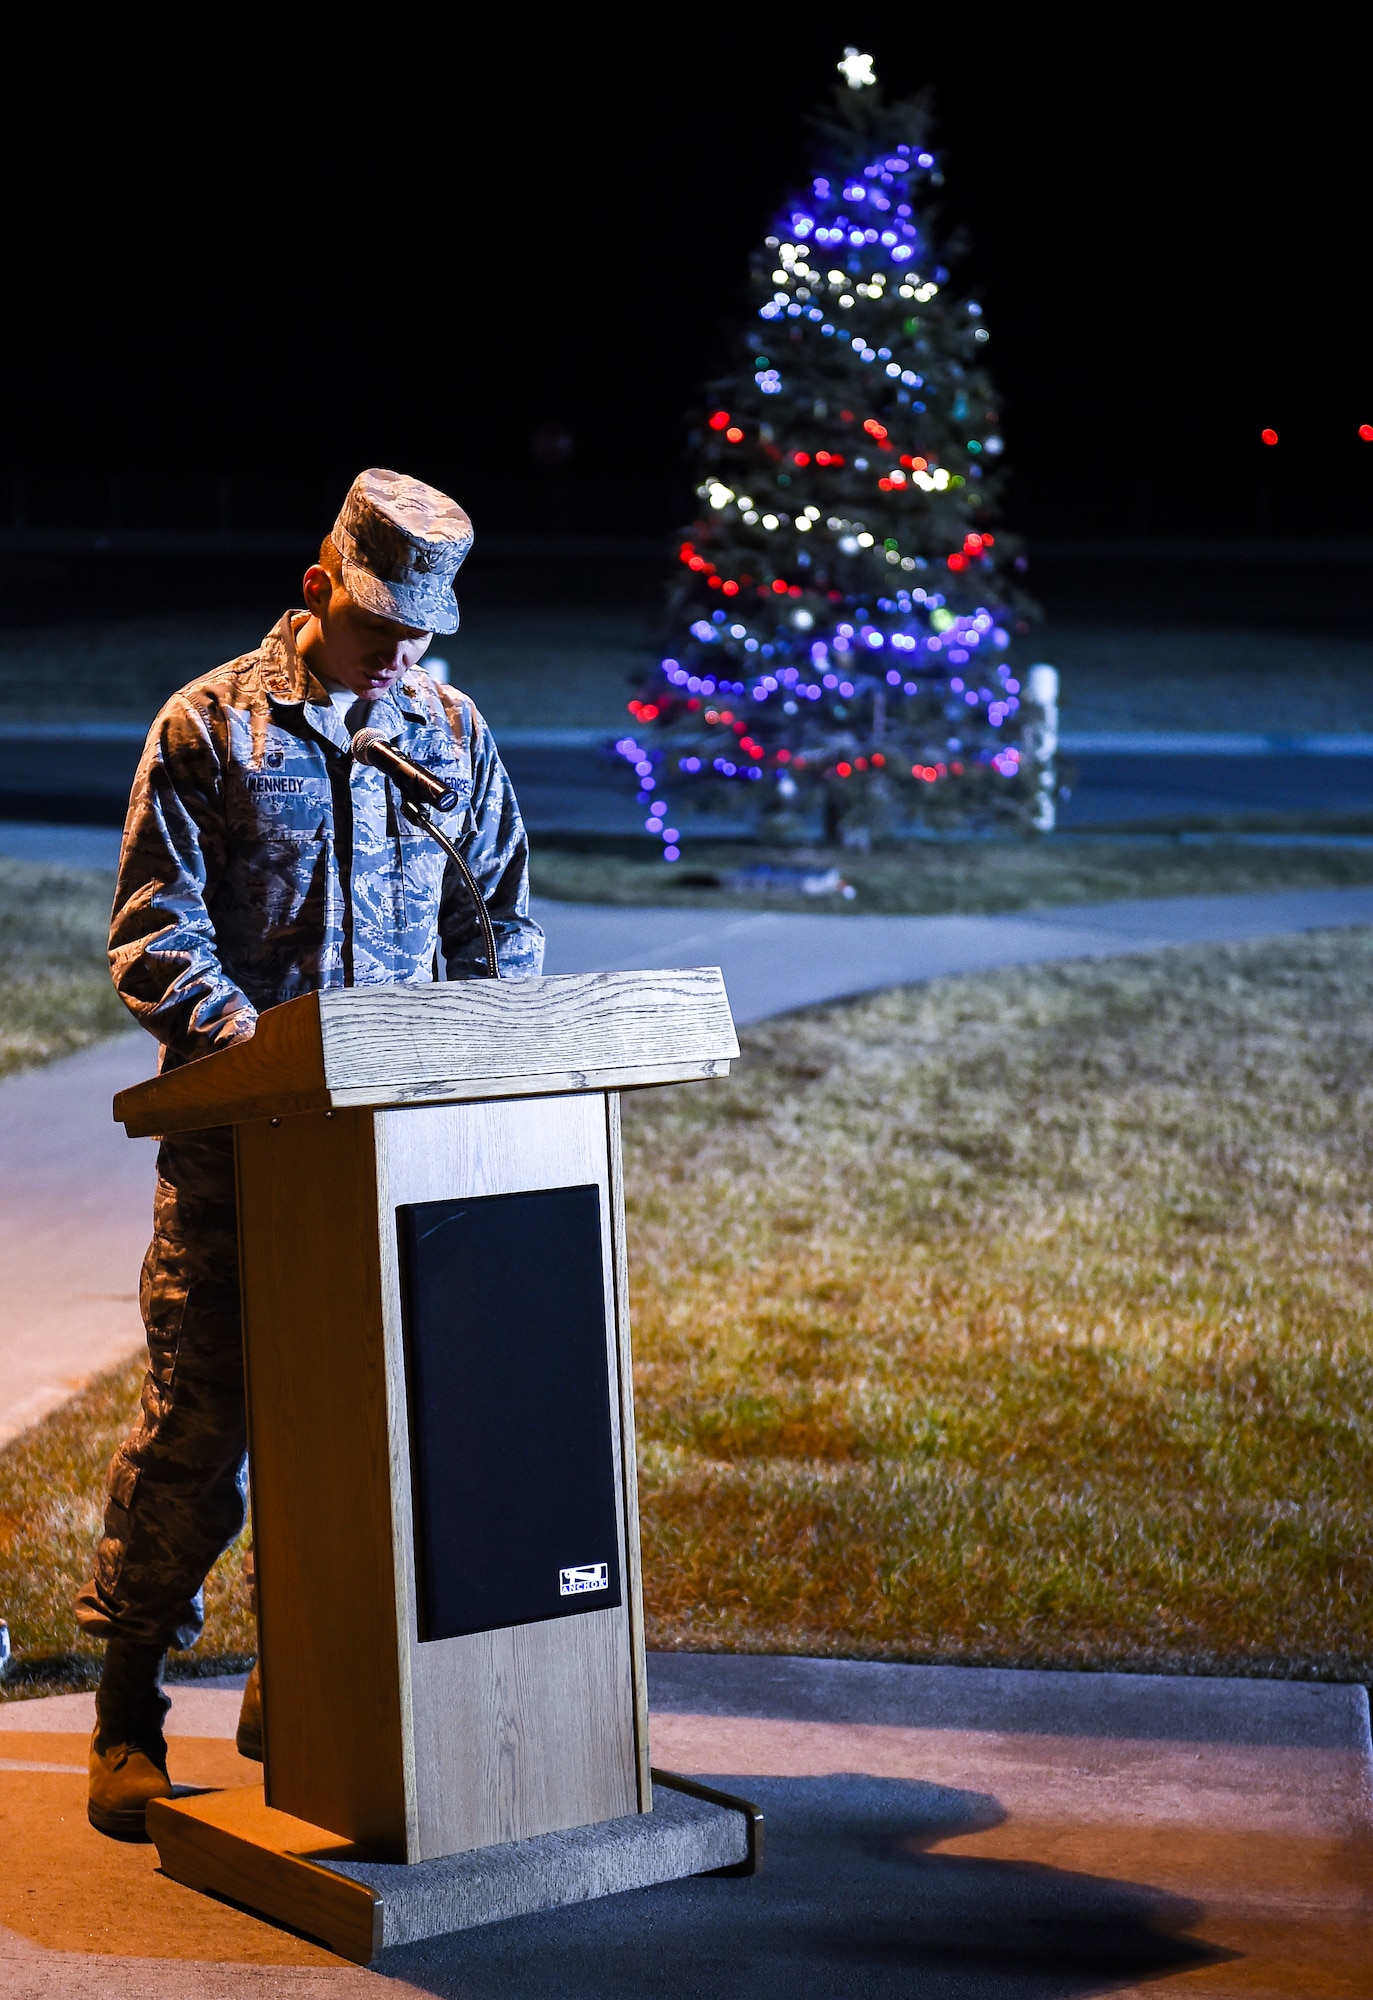 Maj. Christopher Kennedy, 460th Space Communications Squadron commander, speaks to the crowd during a tree-lighting ceremony Dec. 2, 2014, on Buckley Air Force Base, Colo. The ceremony honored Senior Airman Kristopher Mansfield and Senior Airman Michael Snyder, both members of the 460th Space Communications Squadron who were killed by drunk drivers. (U.S. Air Force photo by Senior Airman Riley Johnson/Released)